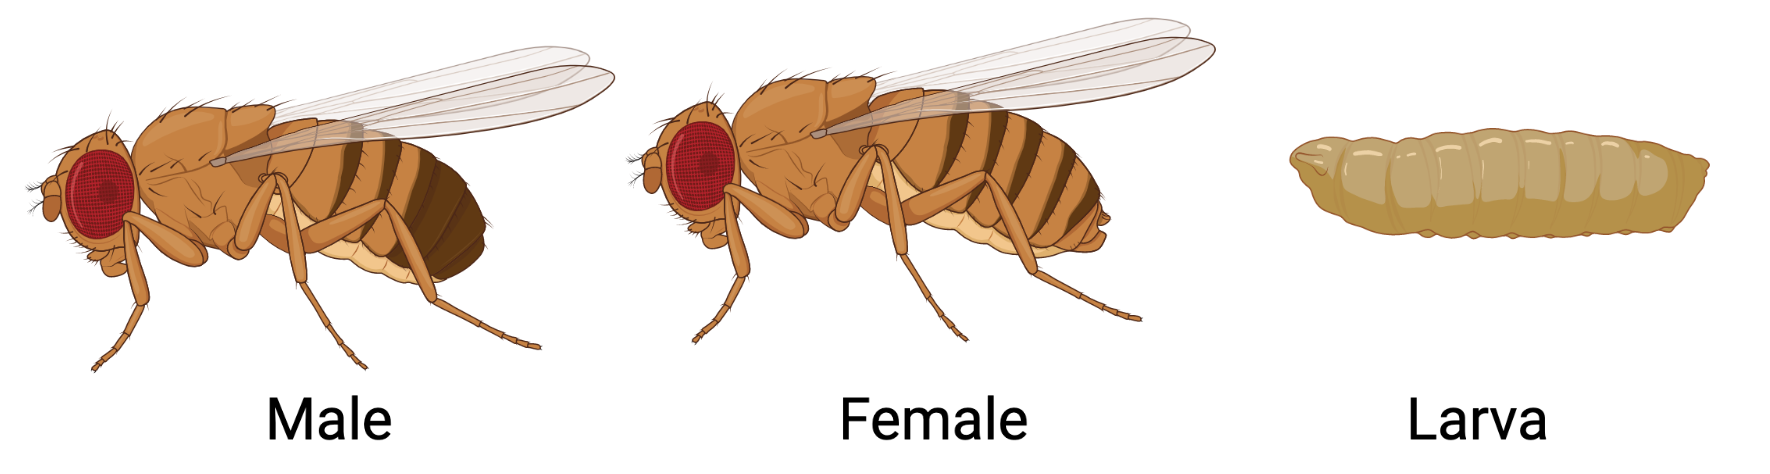 Left: Male red-eyed fruit fly. Middle: Female red-eyed fruit fly. Right: Fly larva.